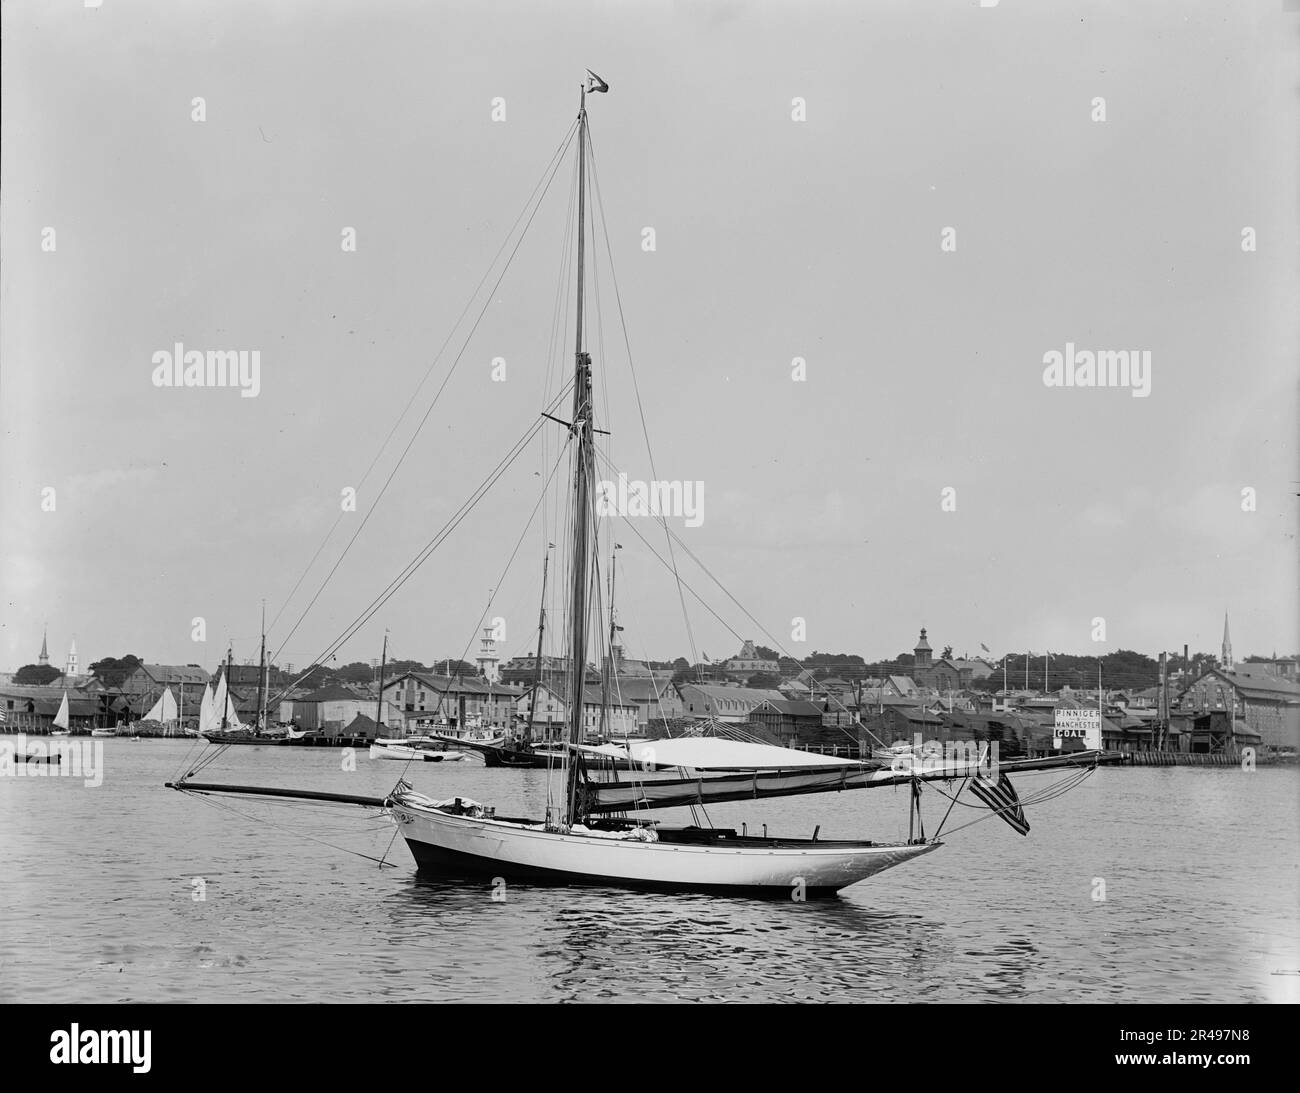 Tomboy, between 1880 and 1899. Photo shows the yacht Tomboy in Newport, Rhode Island, harbor. (Source: C. Ipcar and J. and D. Howard, 2023) Stock Photo